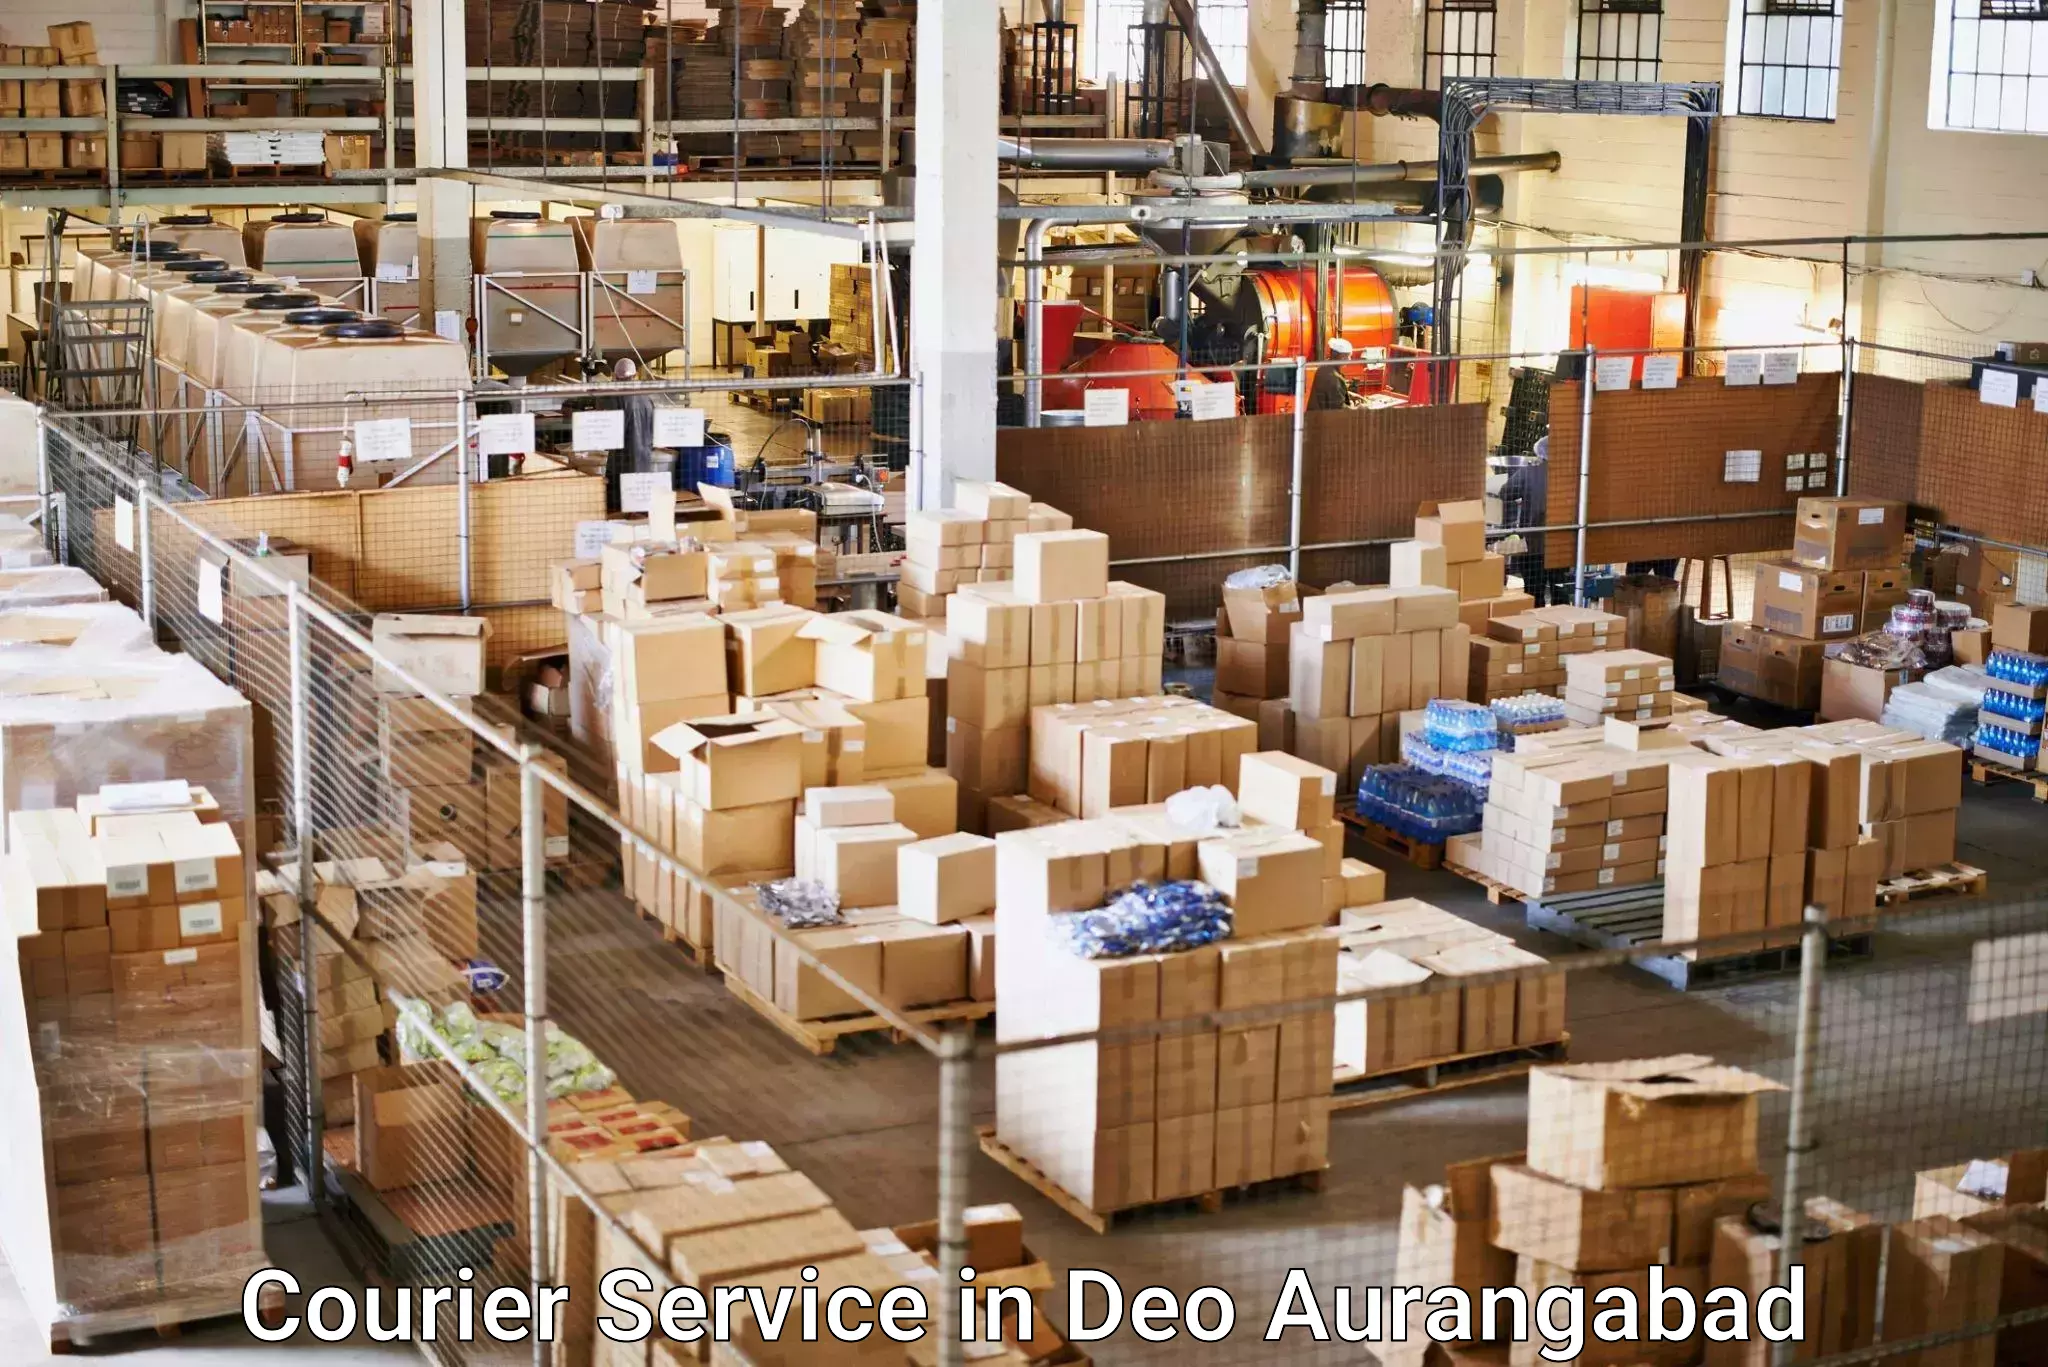 Delivery service partnership in Deo Aurangabad